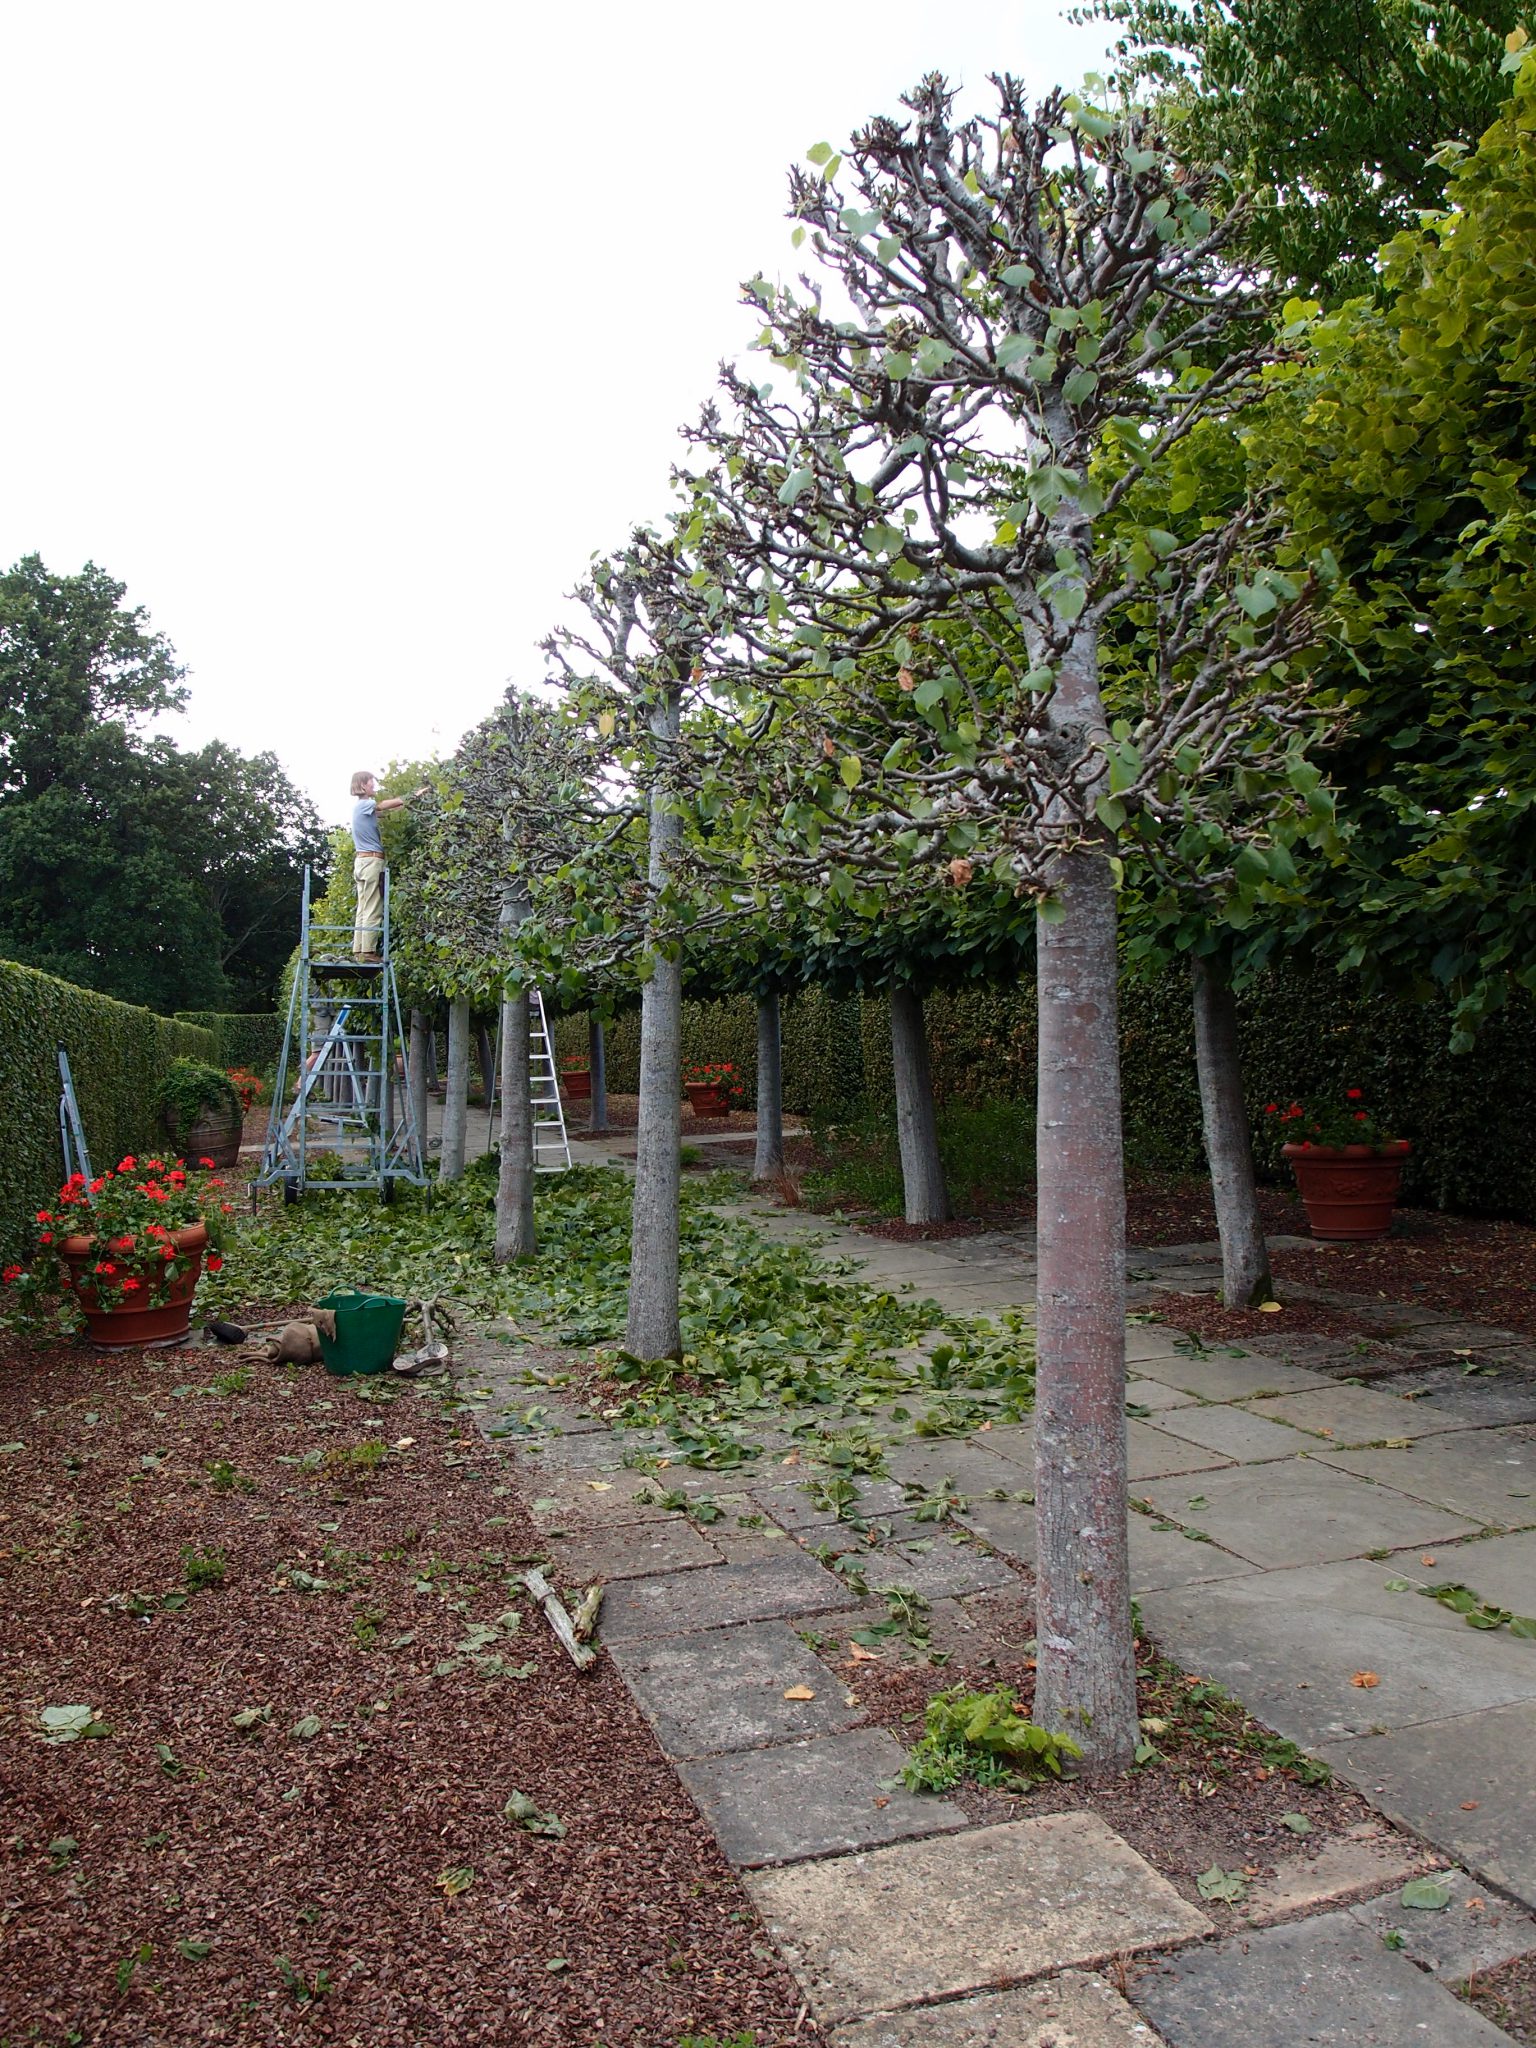 Maintaining the trees on the Lime Walk is a labor-intensive process.